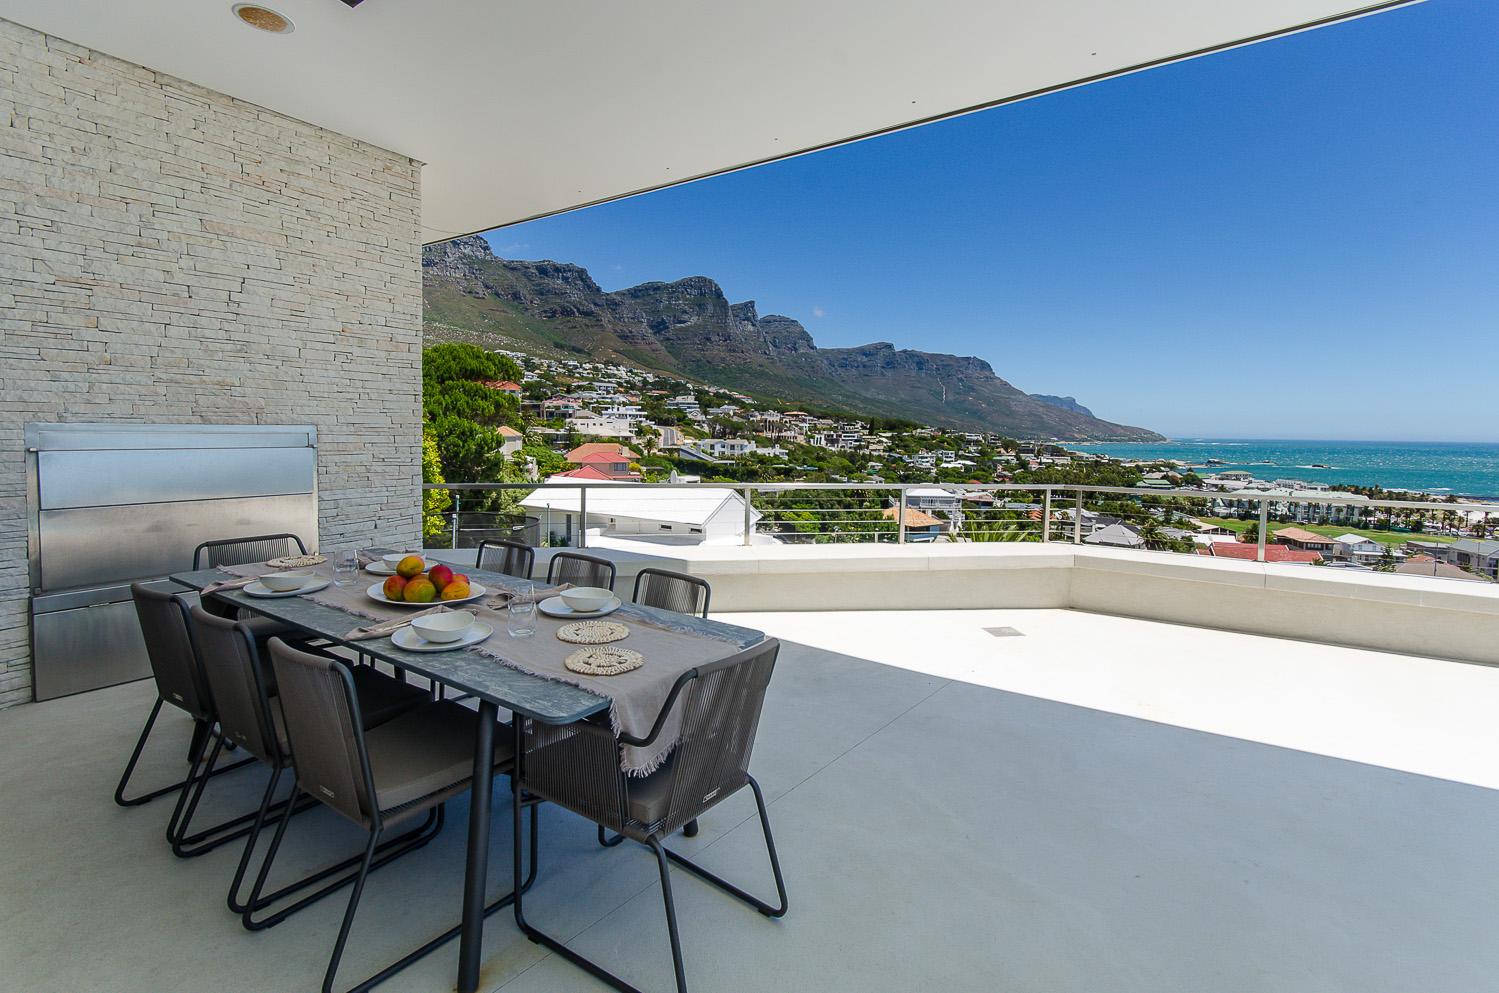 Photo 10 of Strathmore Dream accommodation in Camps Bay, Cape Town with 4 bedrooms and 3 bathrooms